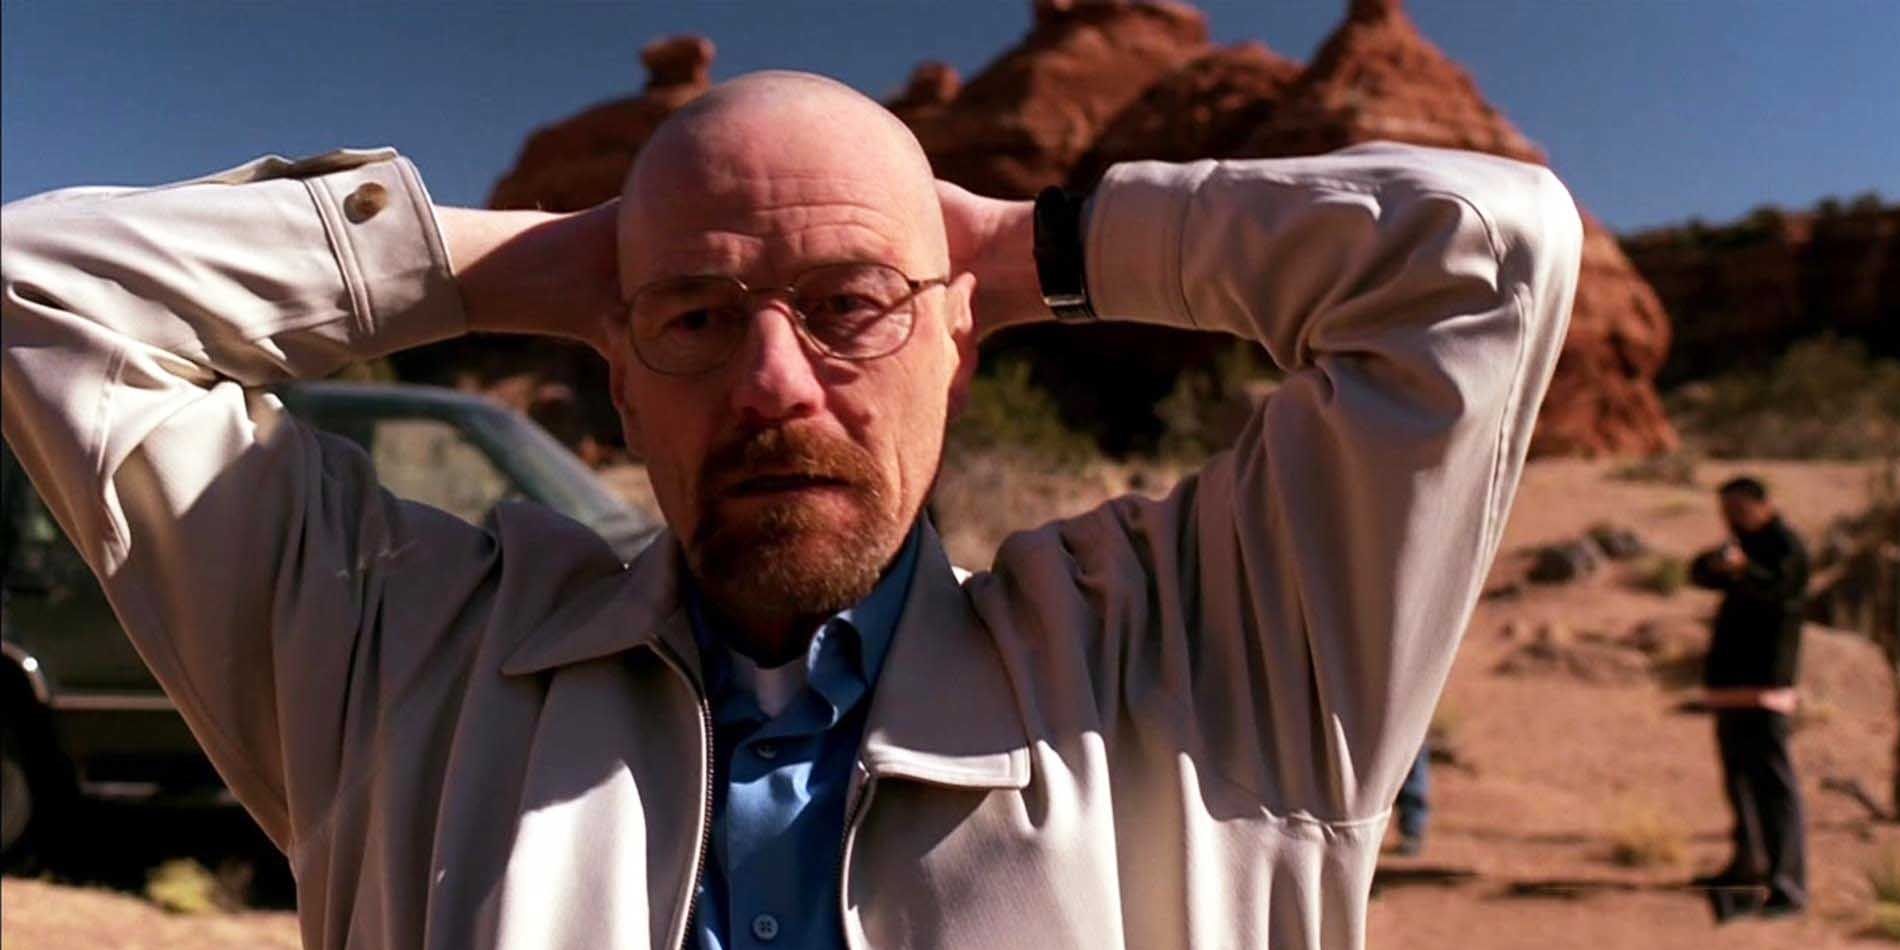 5 Things Weeds Did Better Than Breaking Bad (& 5 Things Breaking Bad Did Better)